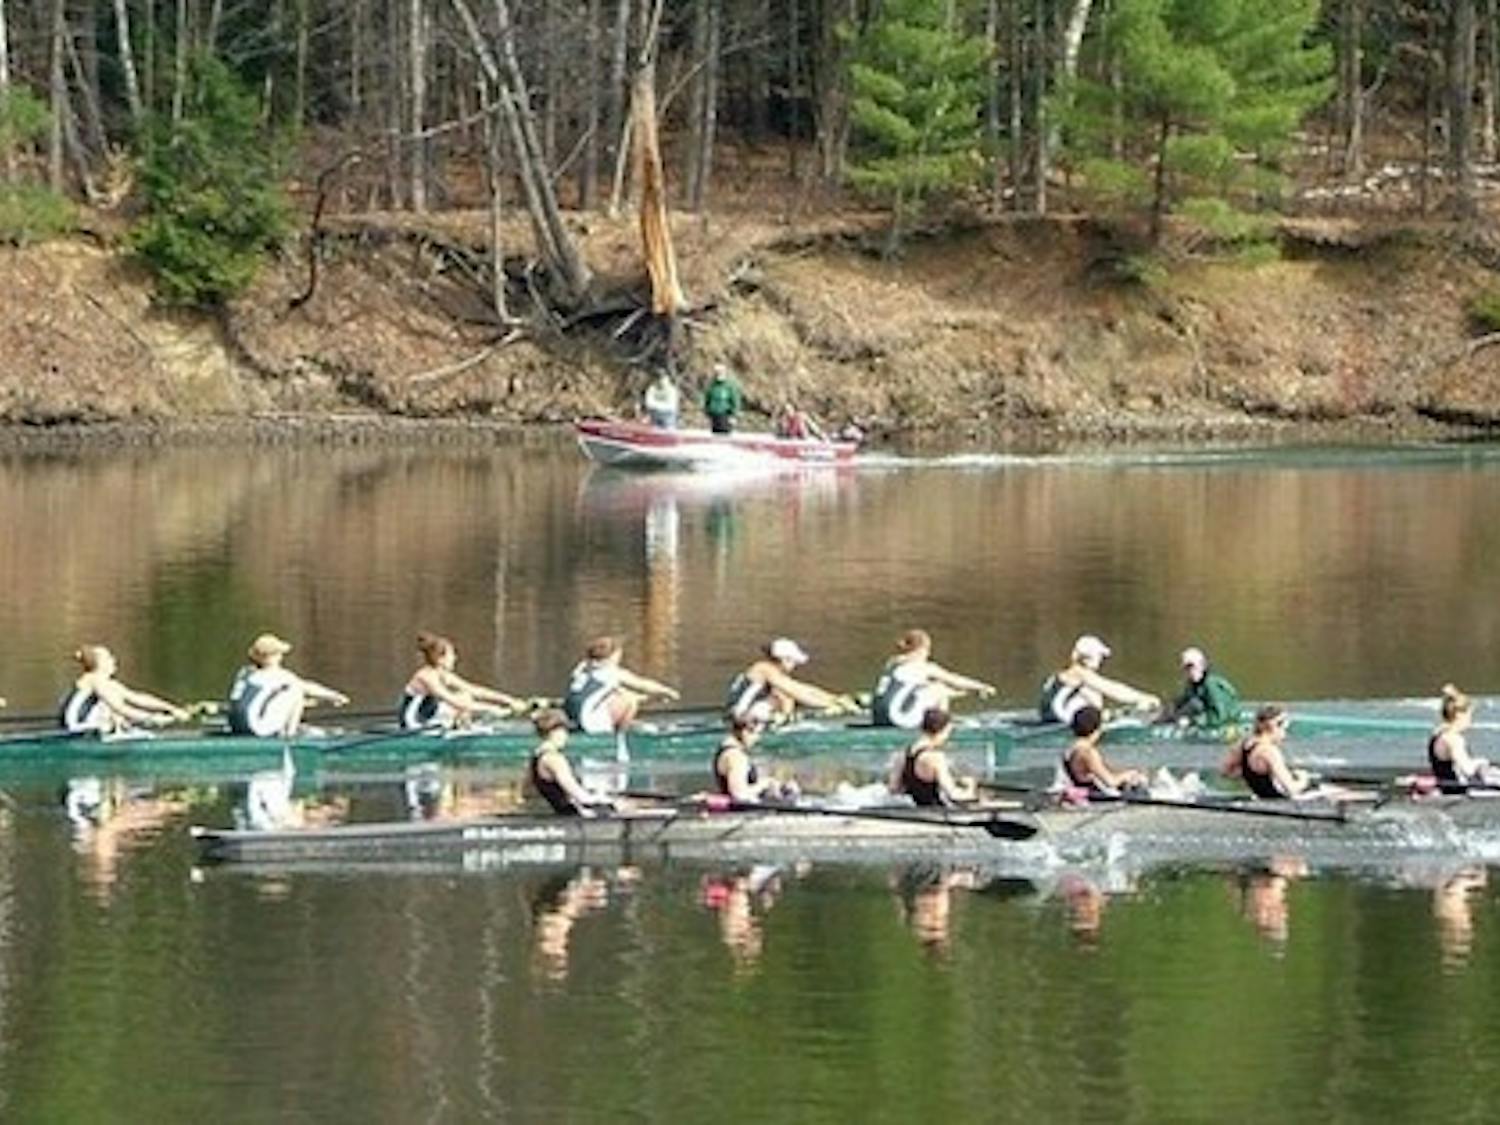 The women's rowing team overtook Radcliffe for the first time since 1998.